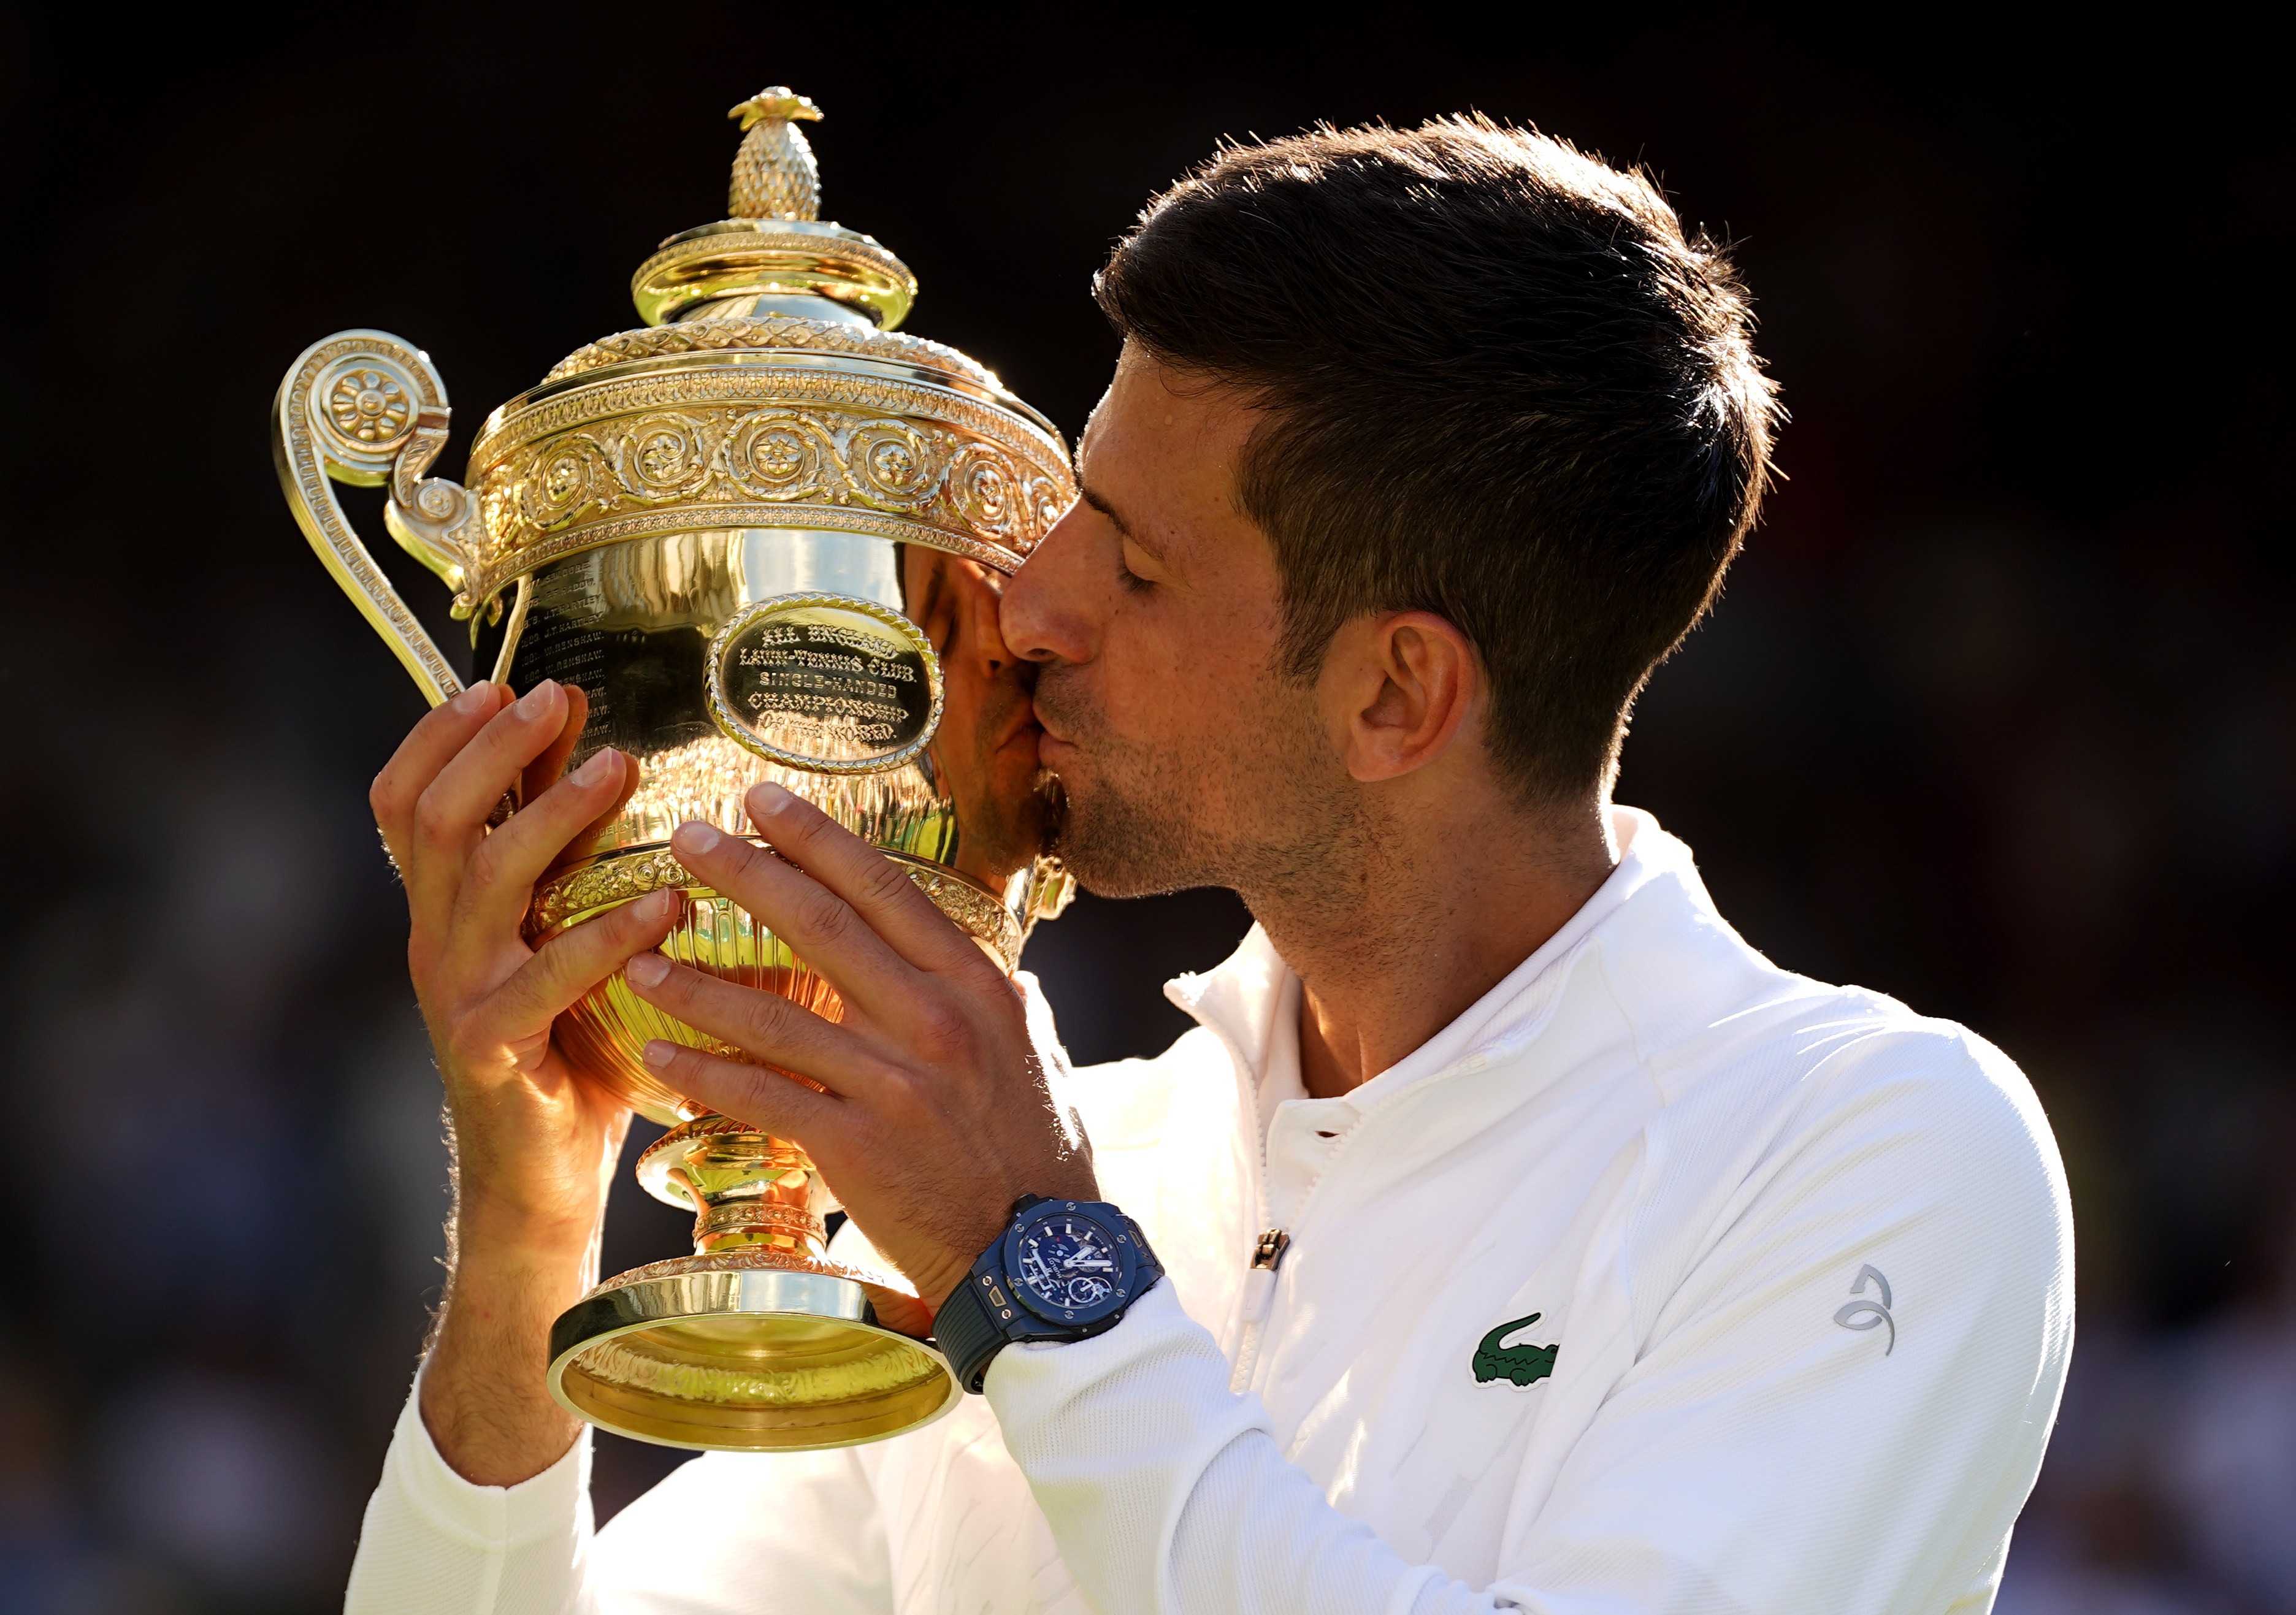 Novak Djokovic celebrates with the Wimbledon trophy after defeating Australia’s Nick Kyrgios in their men’s singles final match at the All England Lawn Tennis and Croquet Club in London on July 10. Photo: PA Wire/dpa